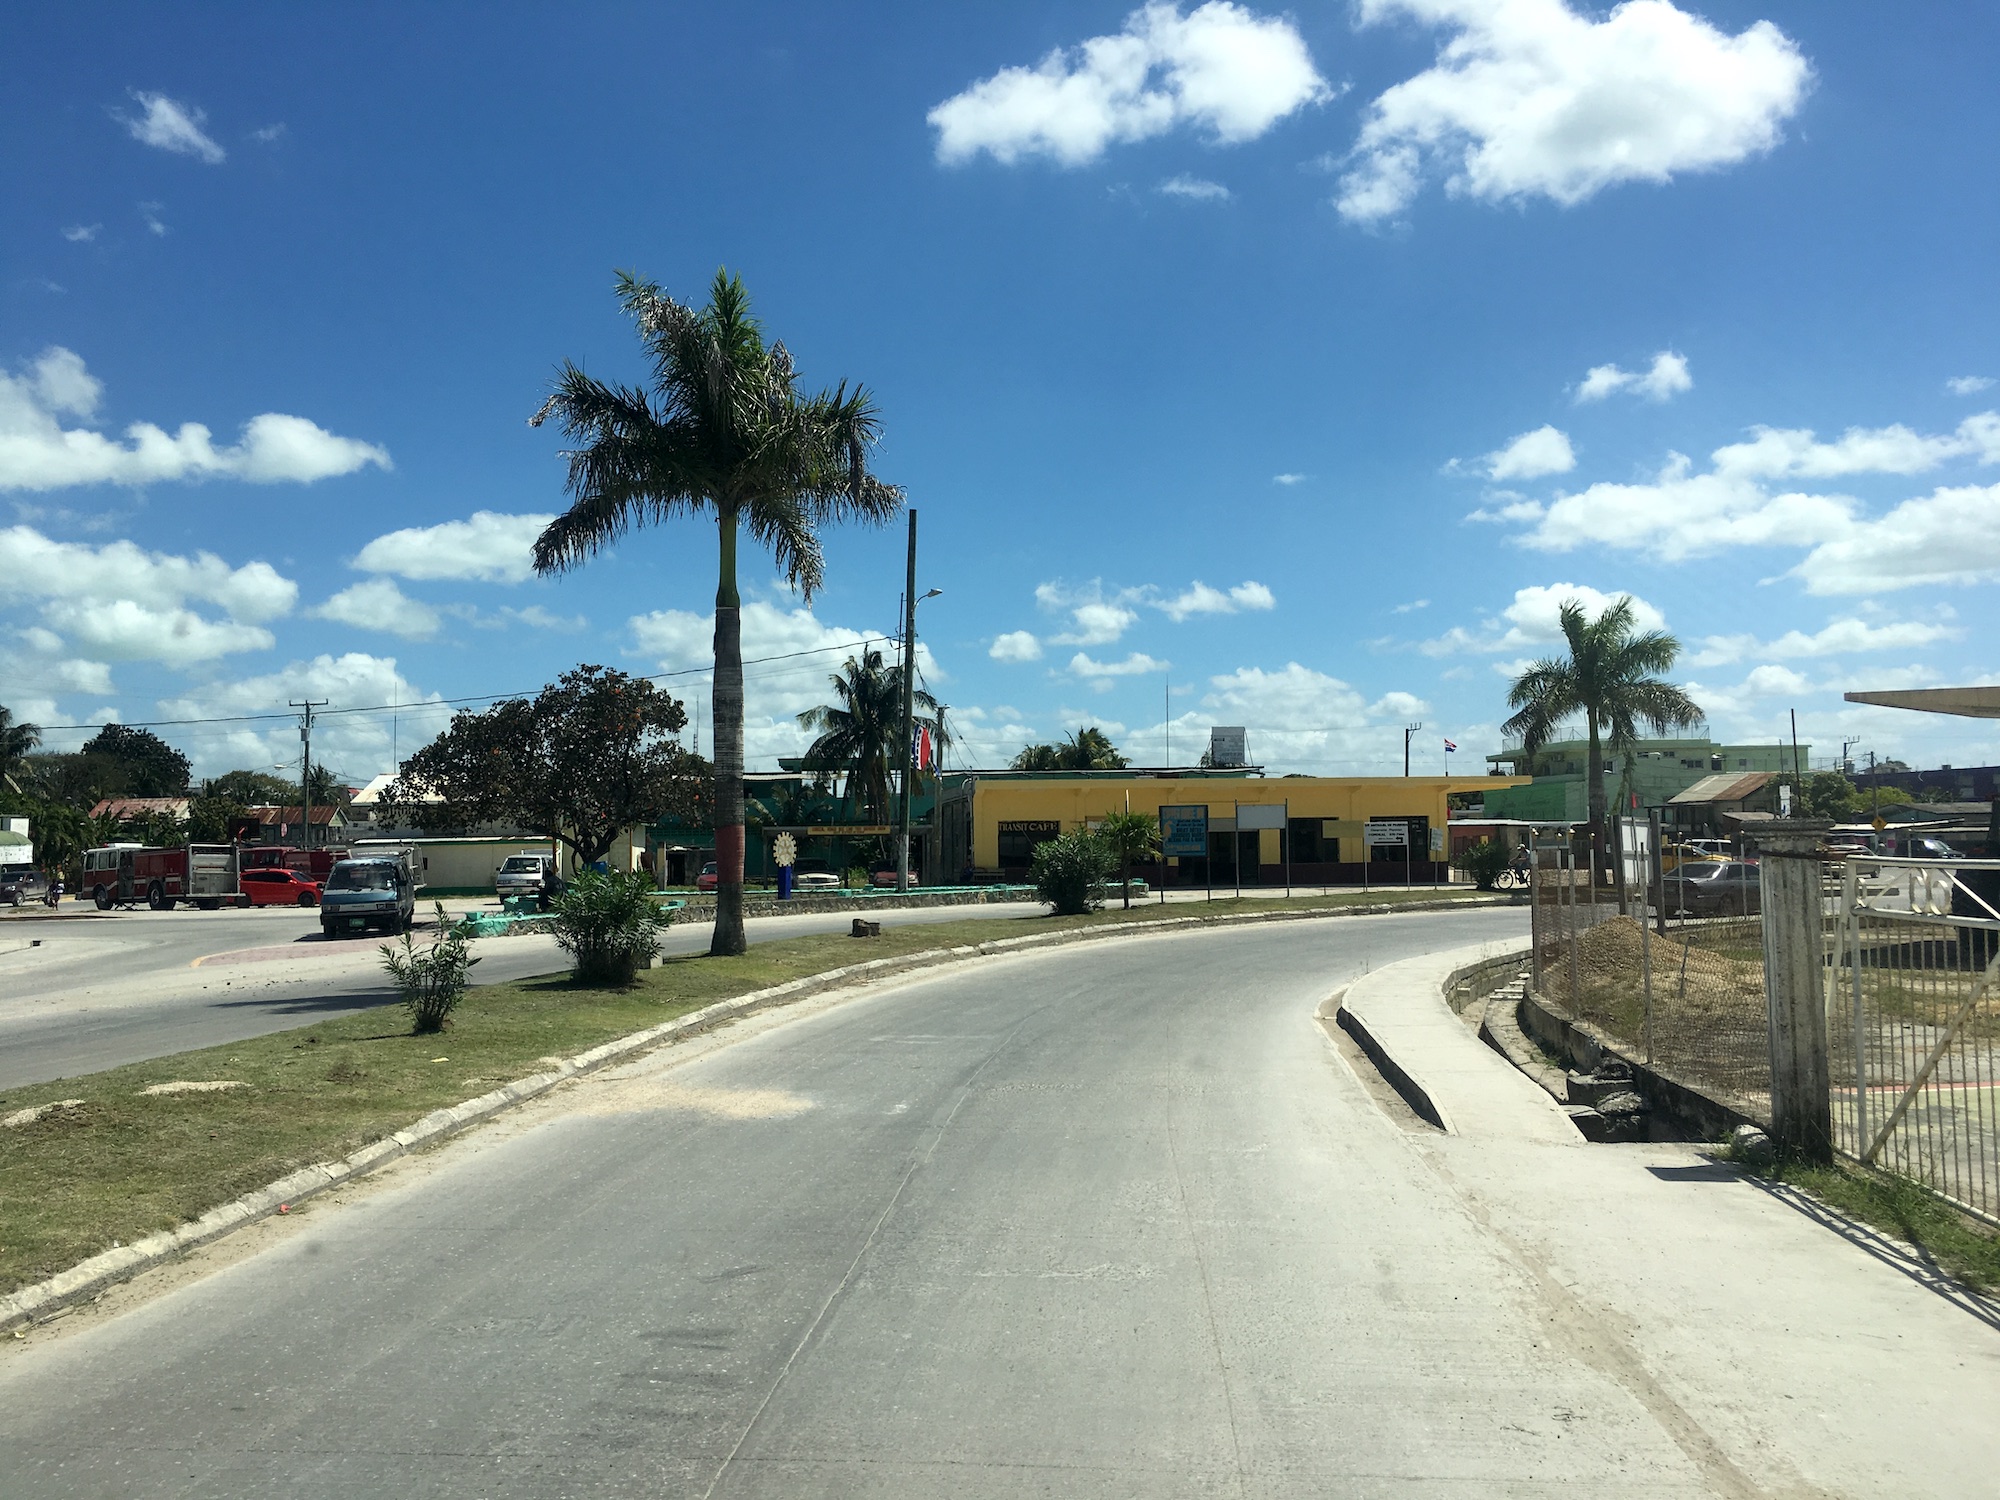 The border with Belize